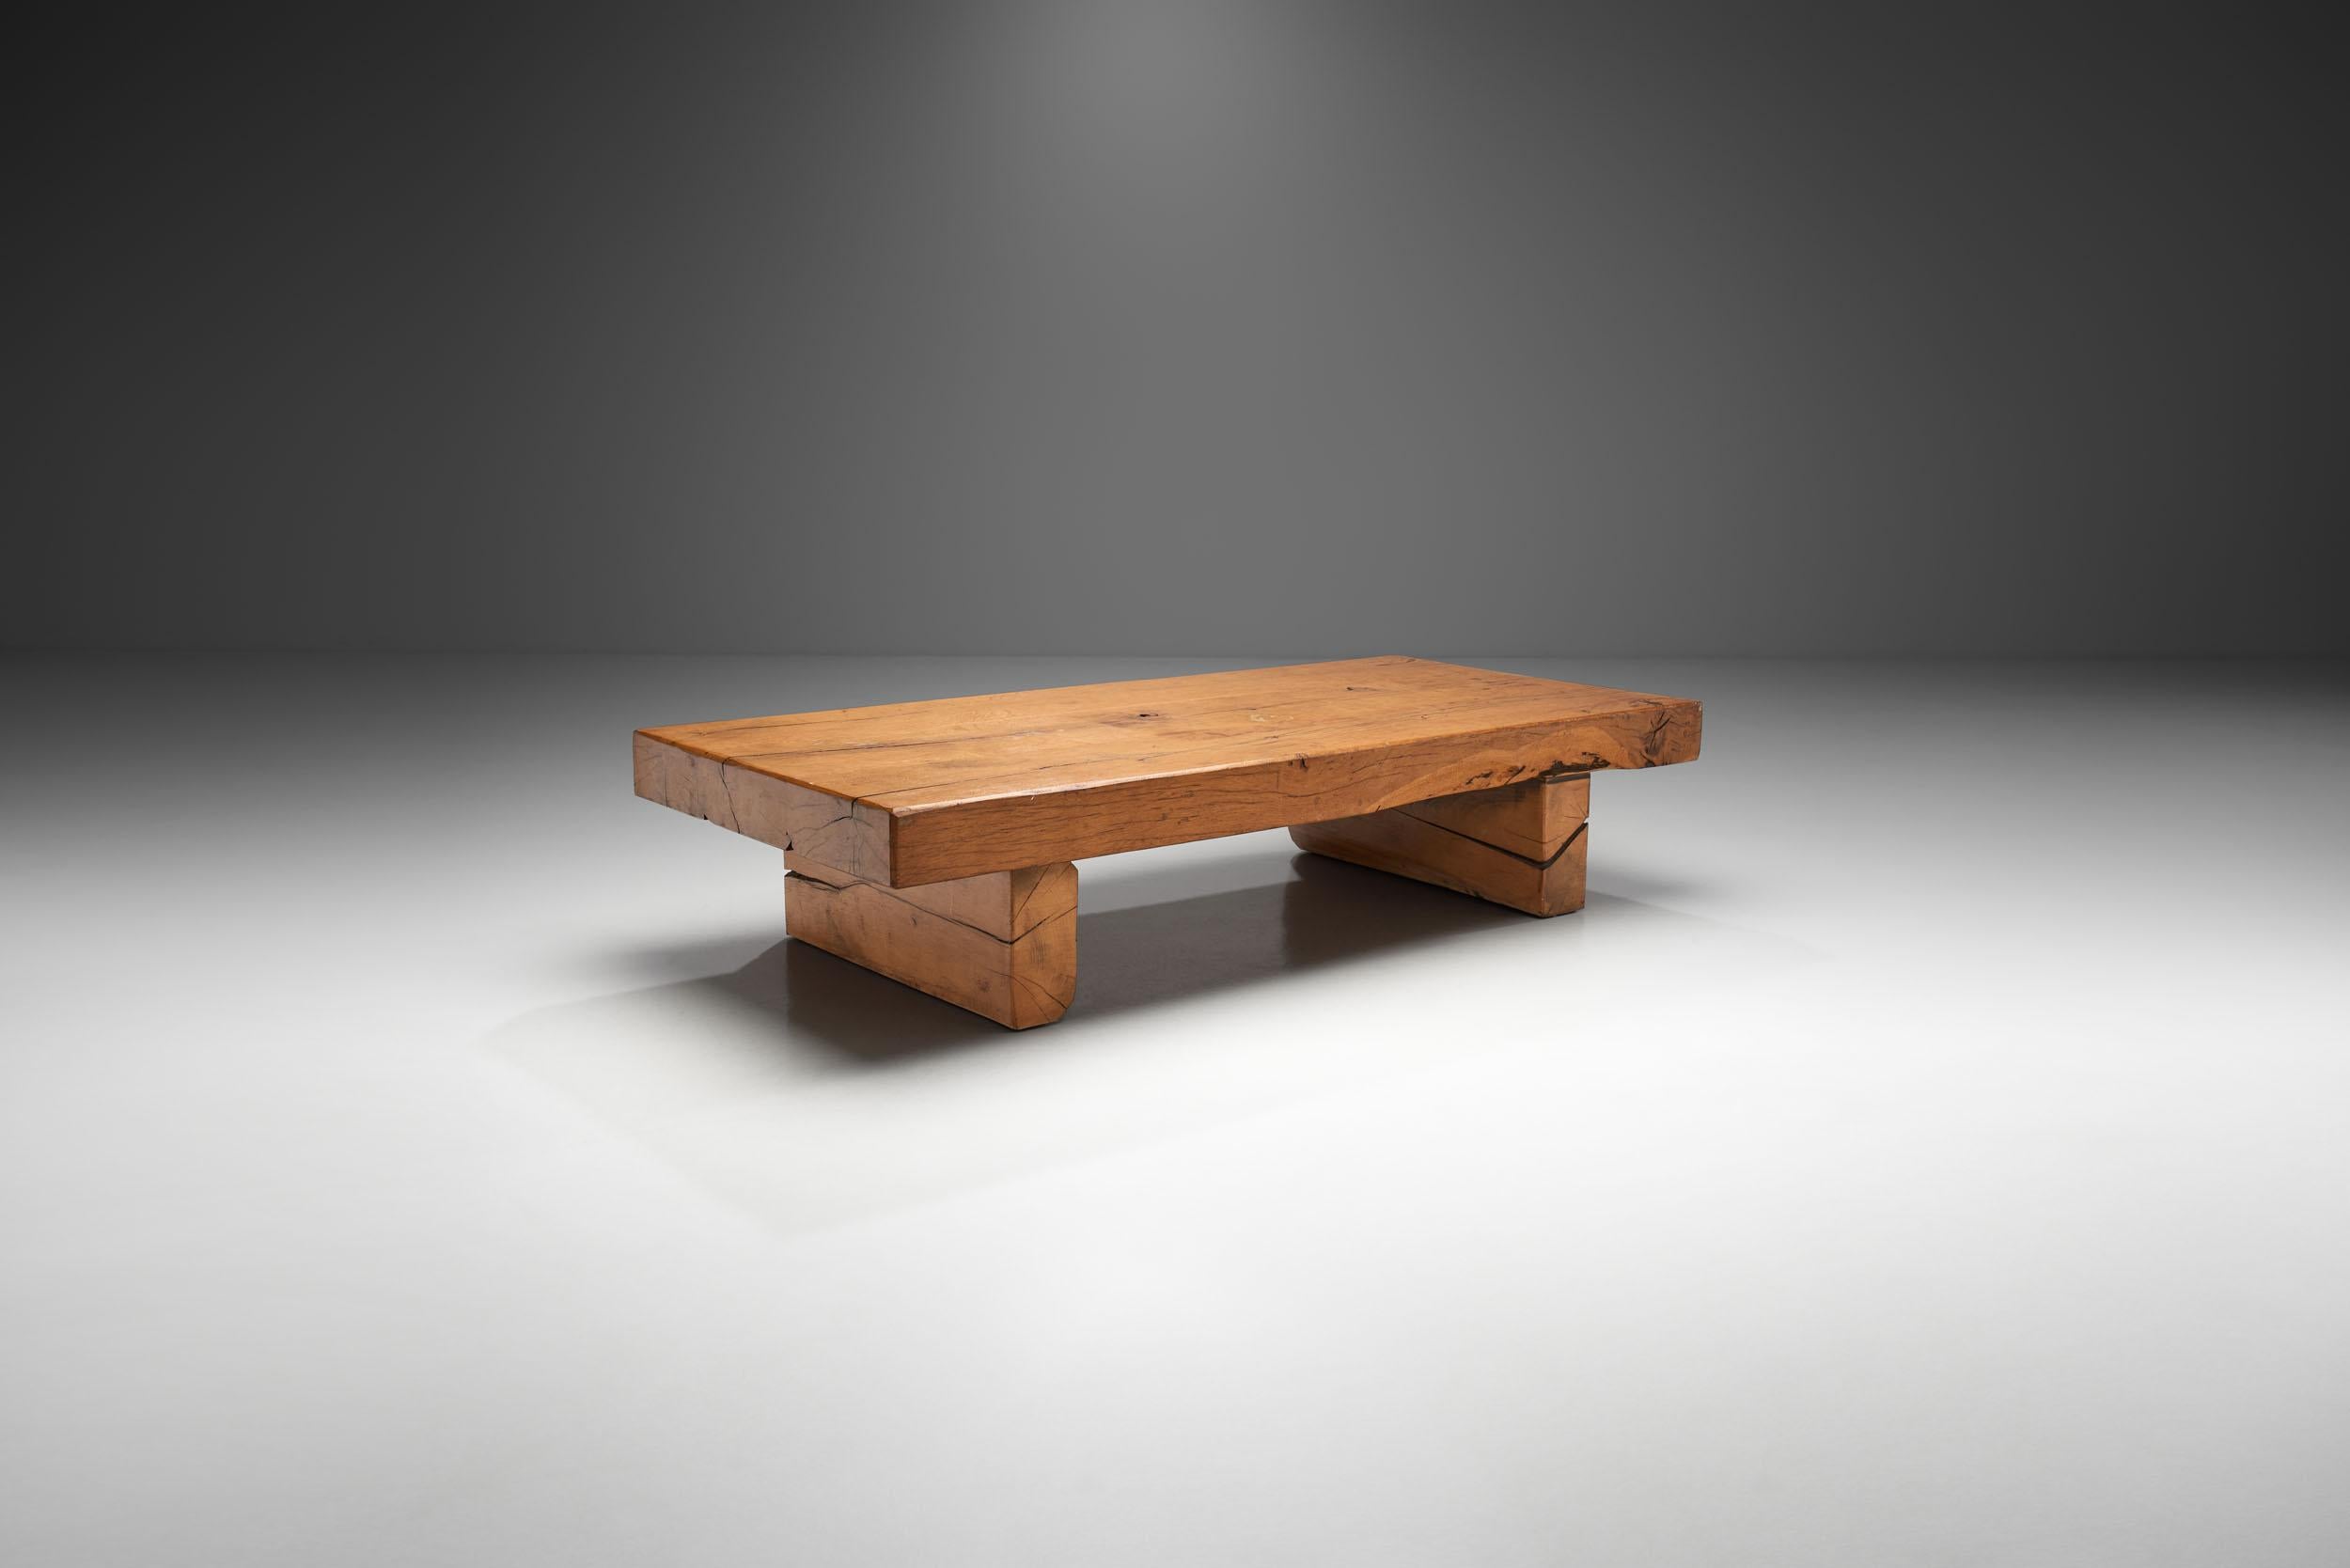 In Scandinavian mid-century design, there was an early emphasis on wood as it connected everyday objects, such as furniture to nature. This rustic, solid wood coffee table is a perfect example of this sentiment, and of the visual benefits of an